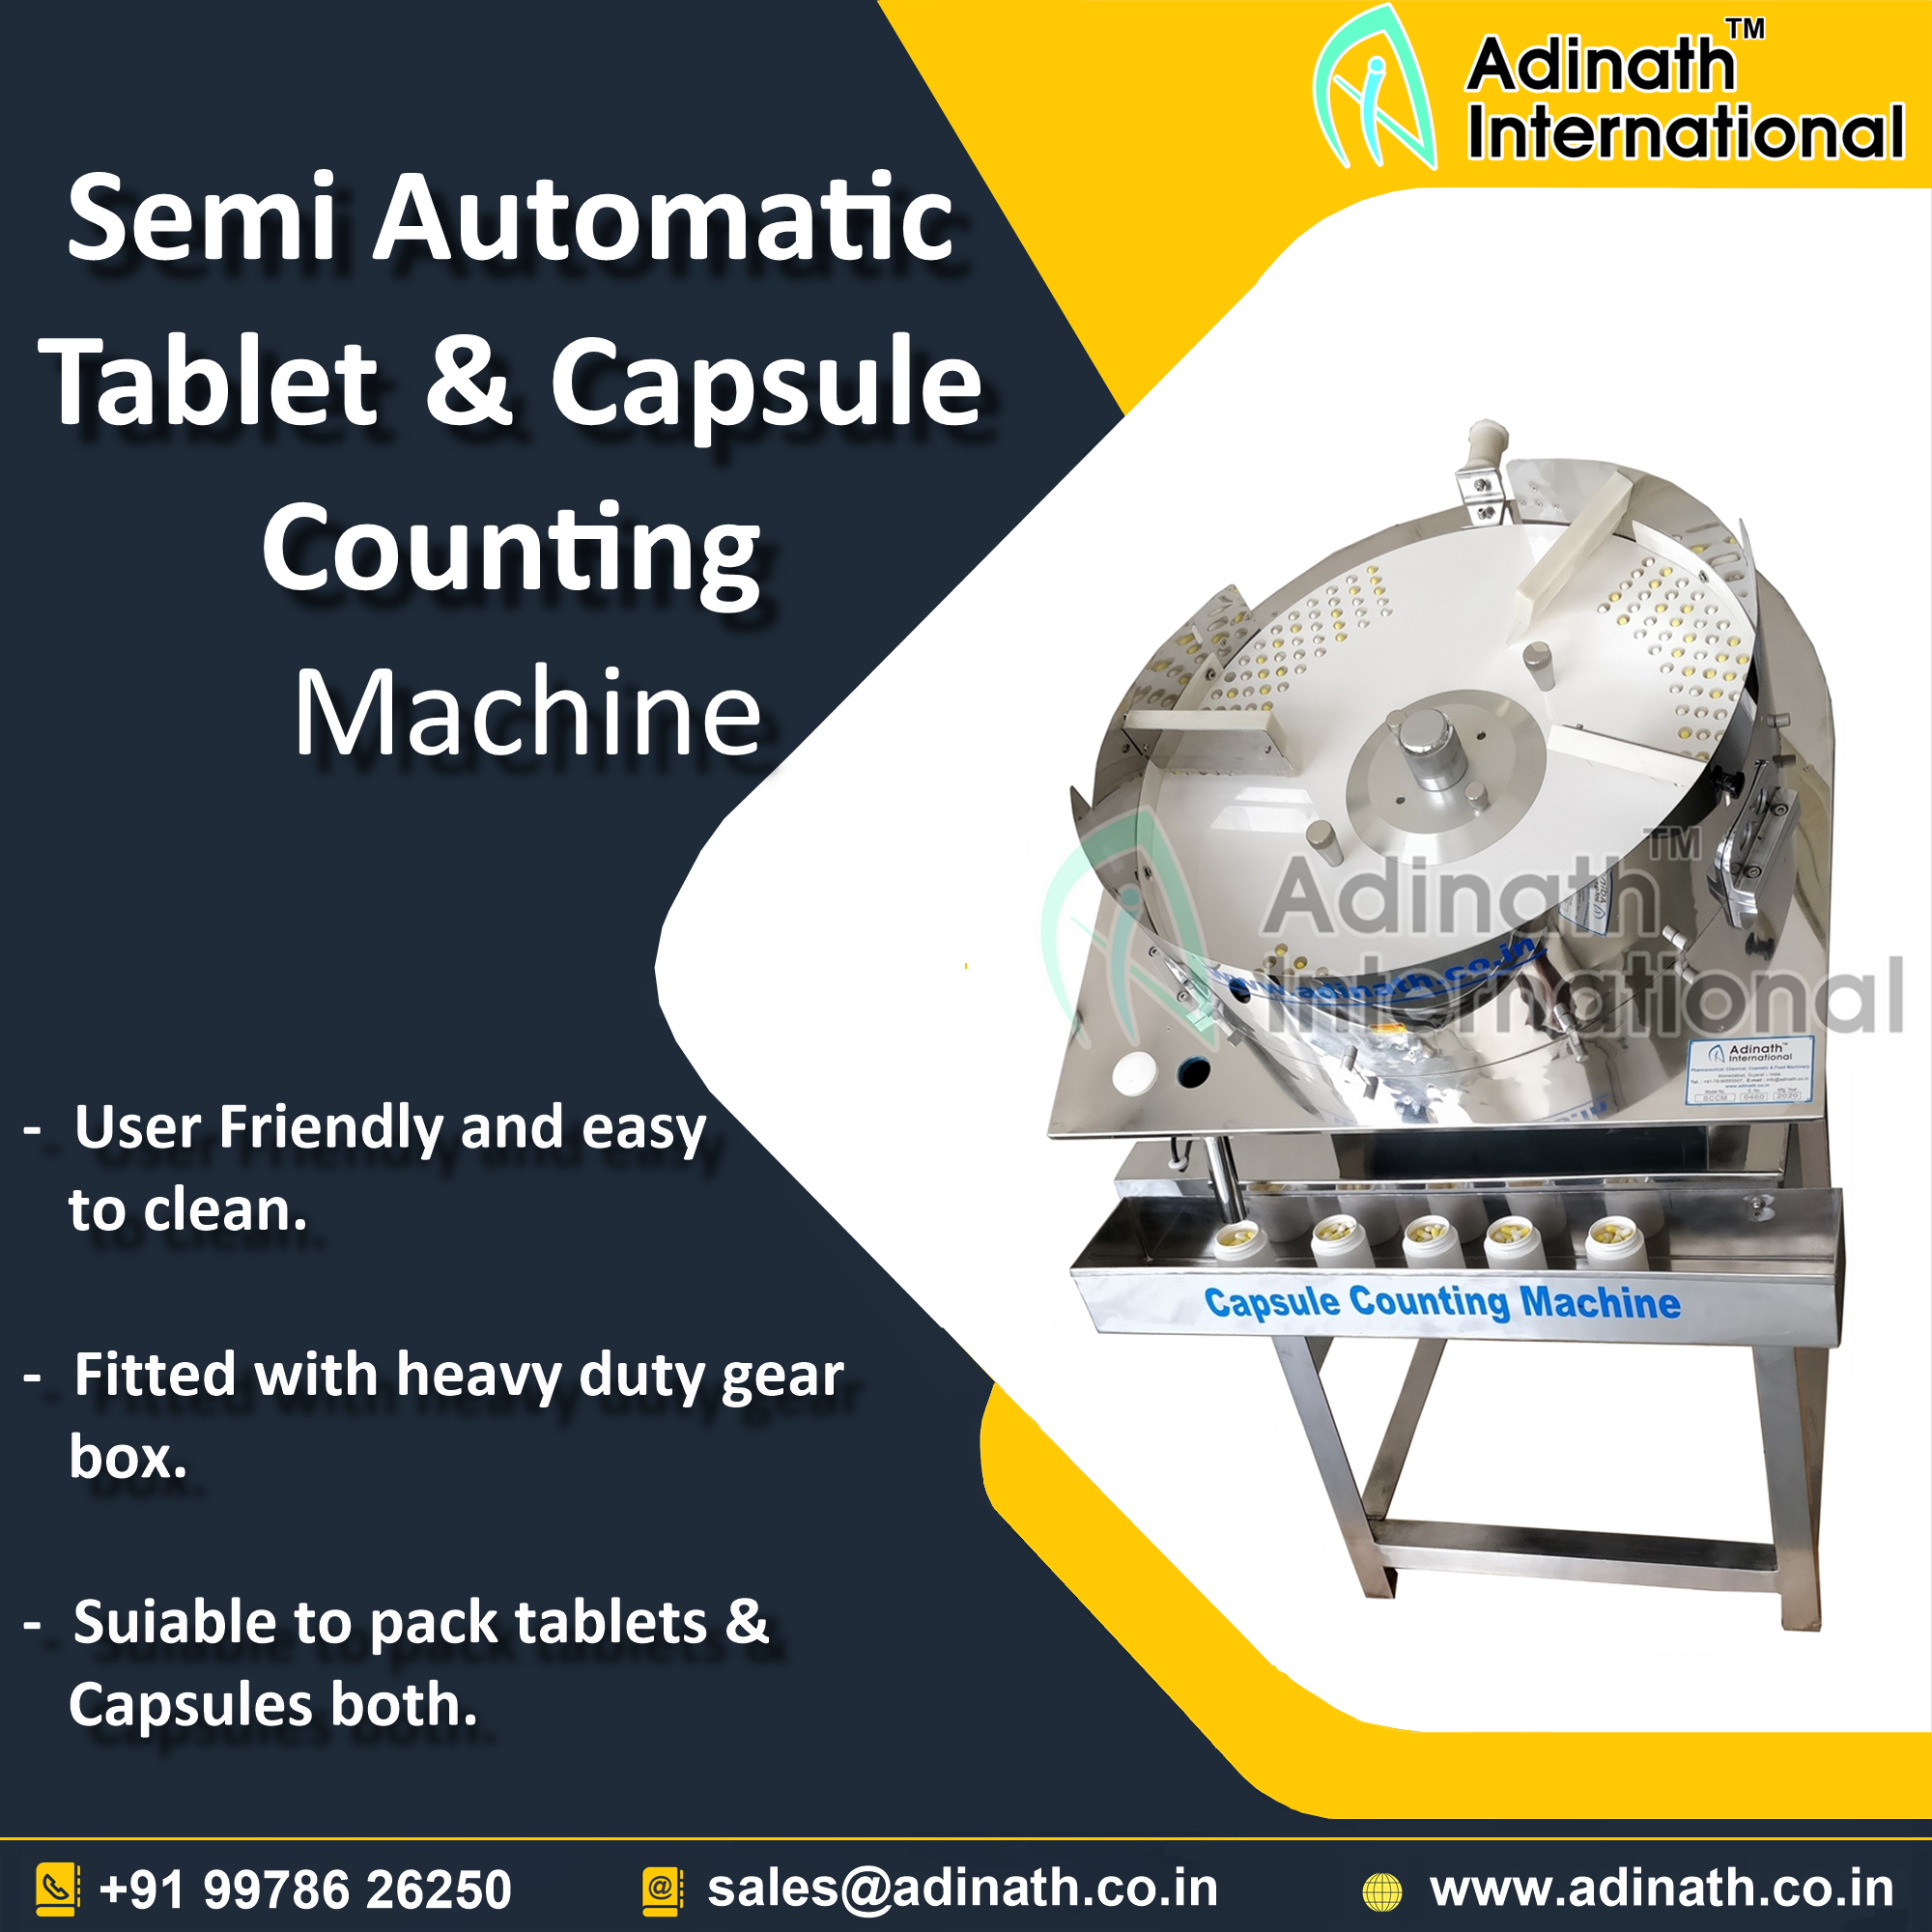 Semi Automatic Tablet Capsule Counting Machine